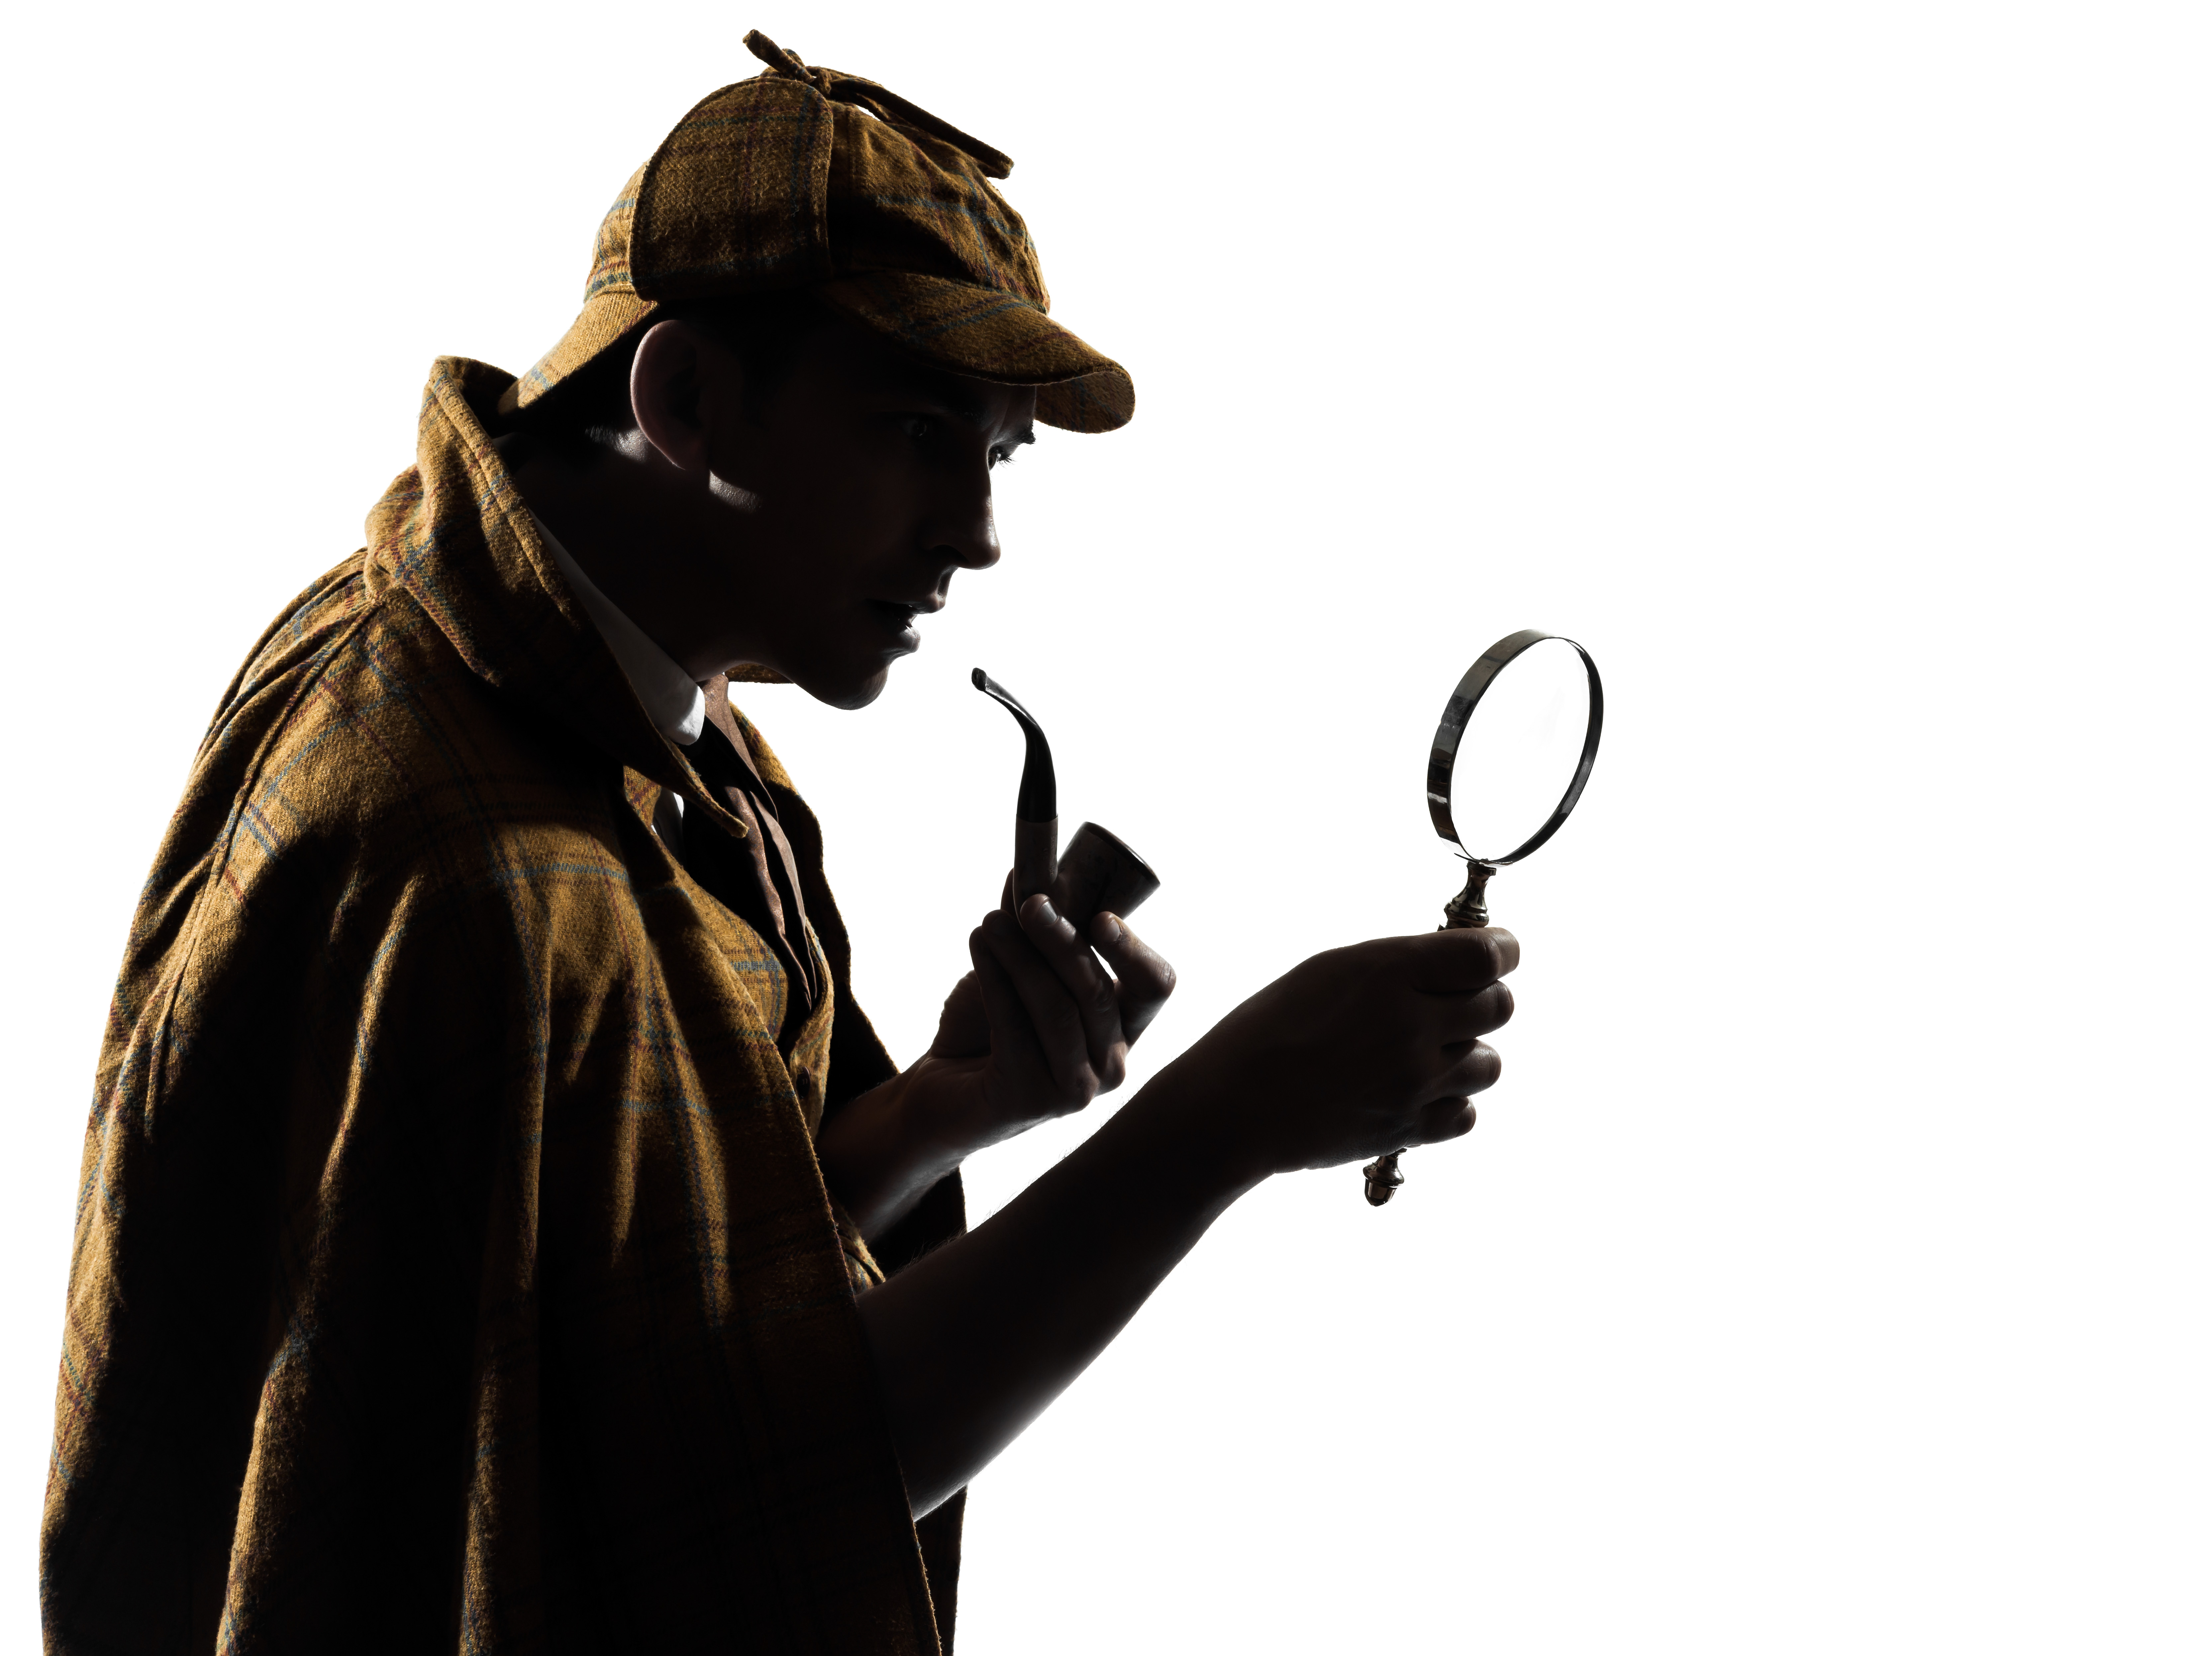 Sillouette of Sherlock Holmes with pipe and magnifying glass